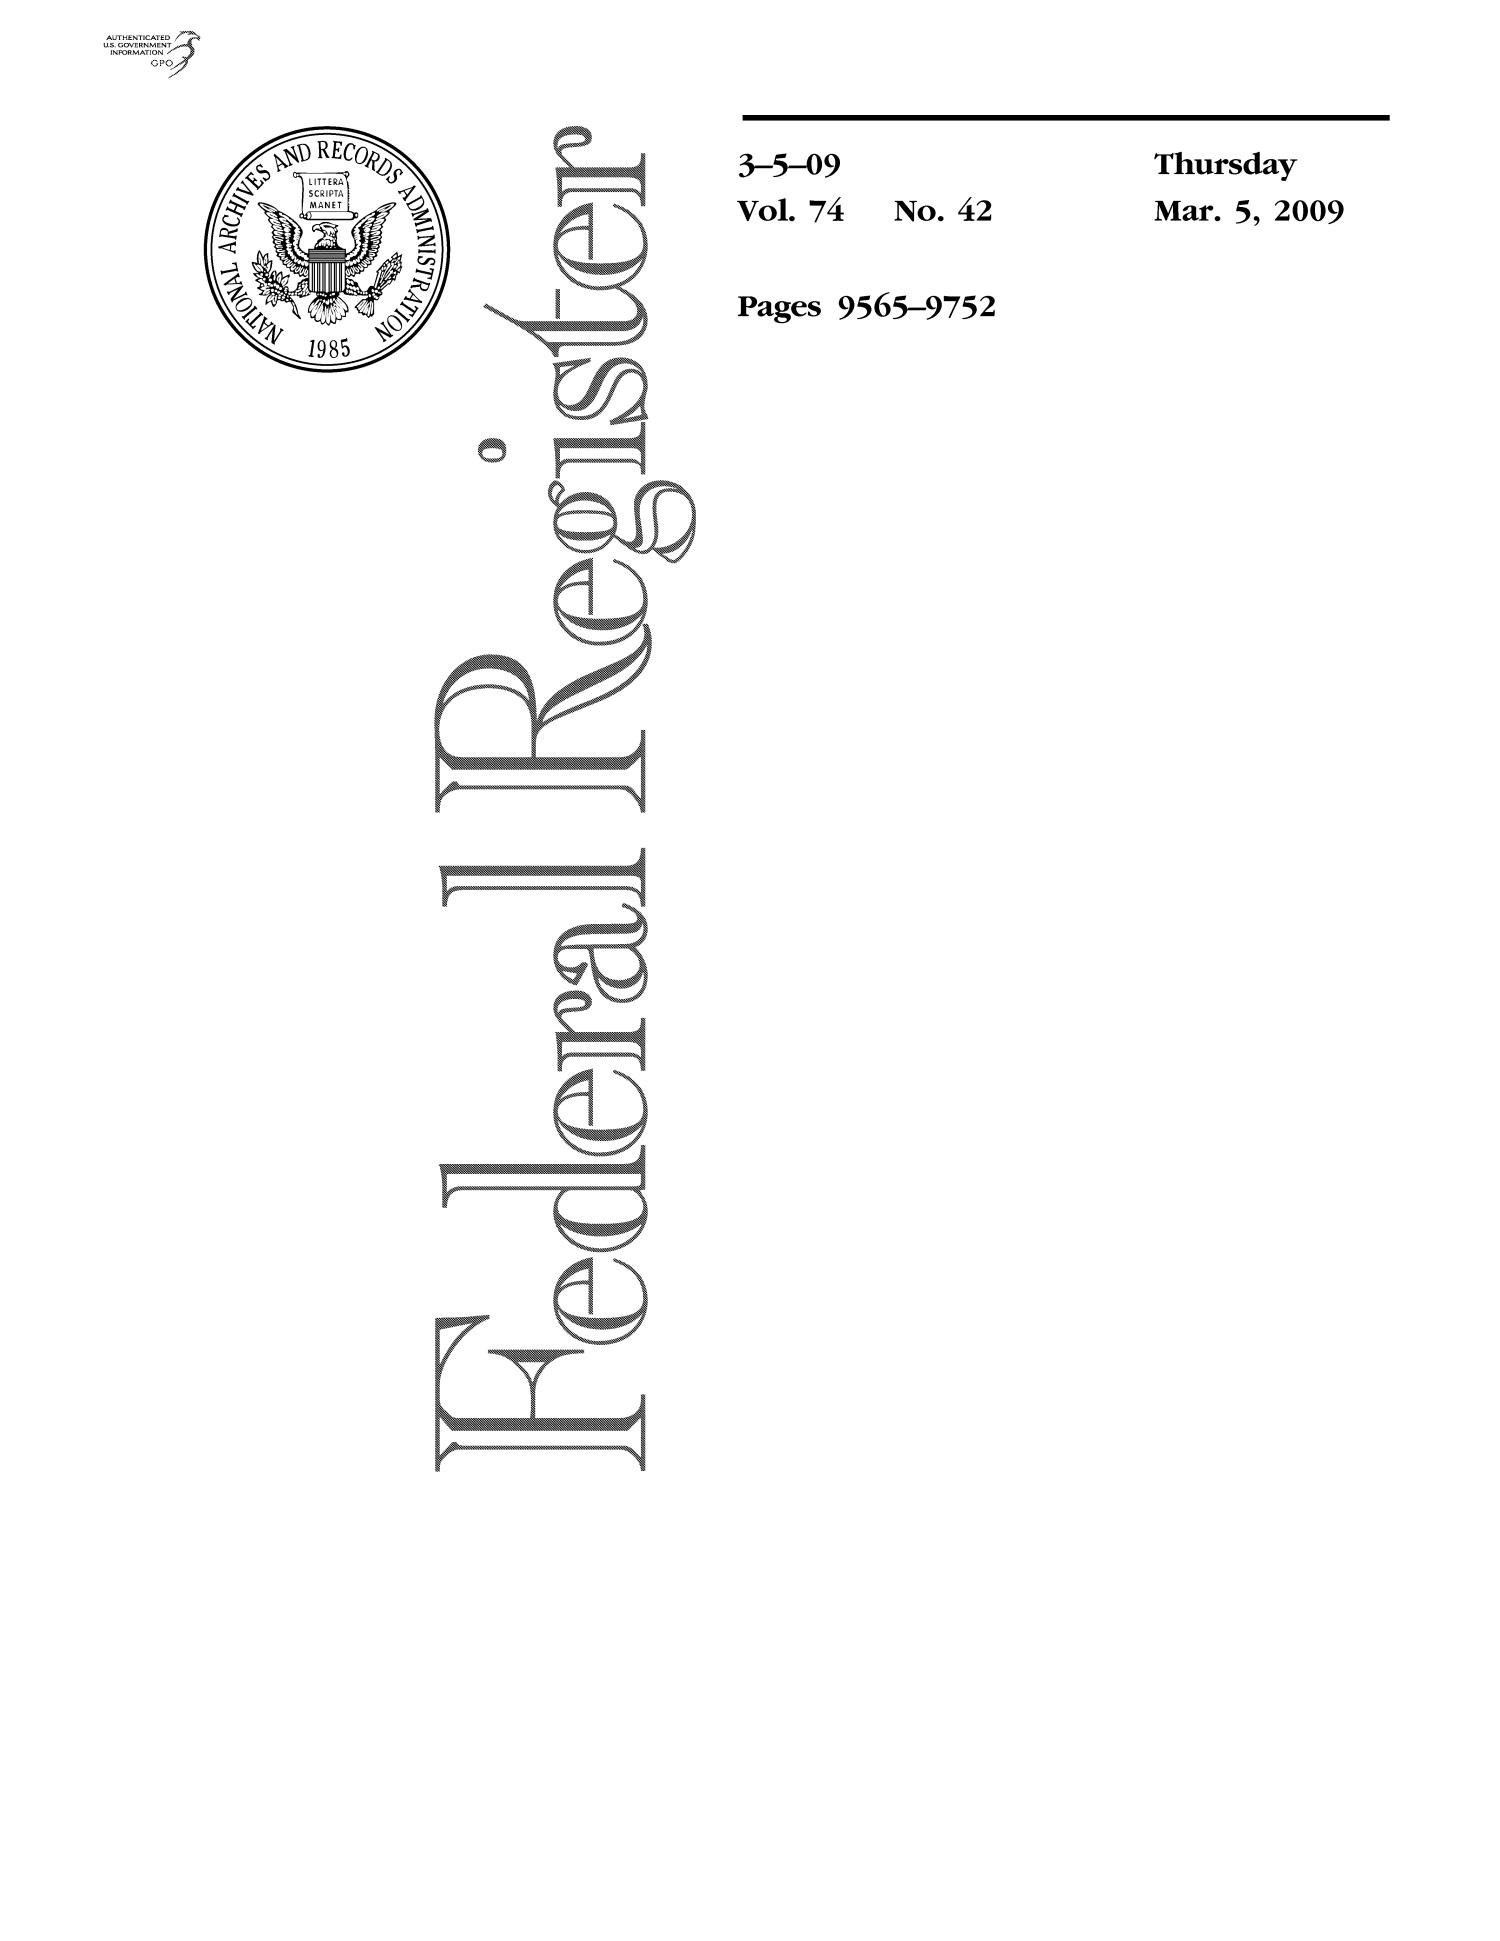 Federal Register, Volume 74, Number 42, March 5, 2009, Pages 9565-9752
                                                
                                                    Title Page
                                                